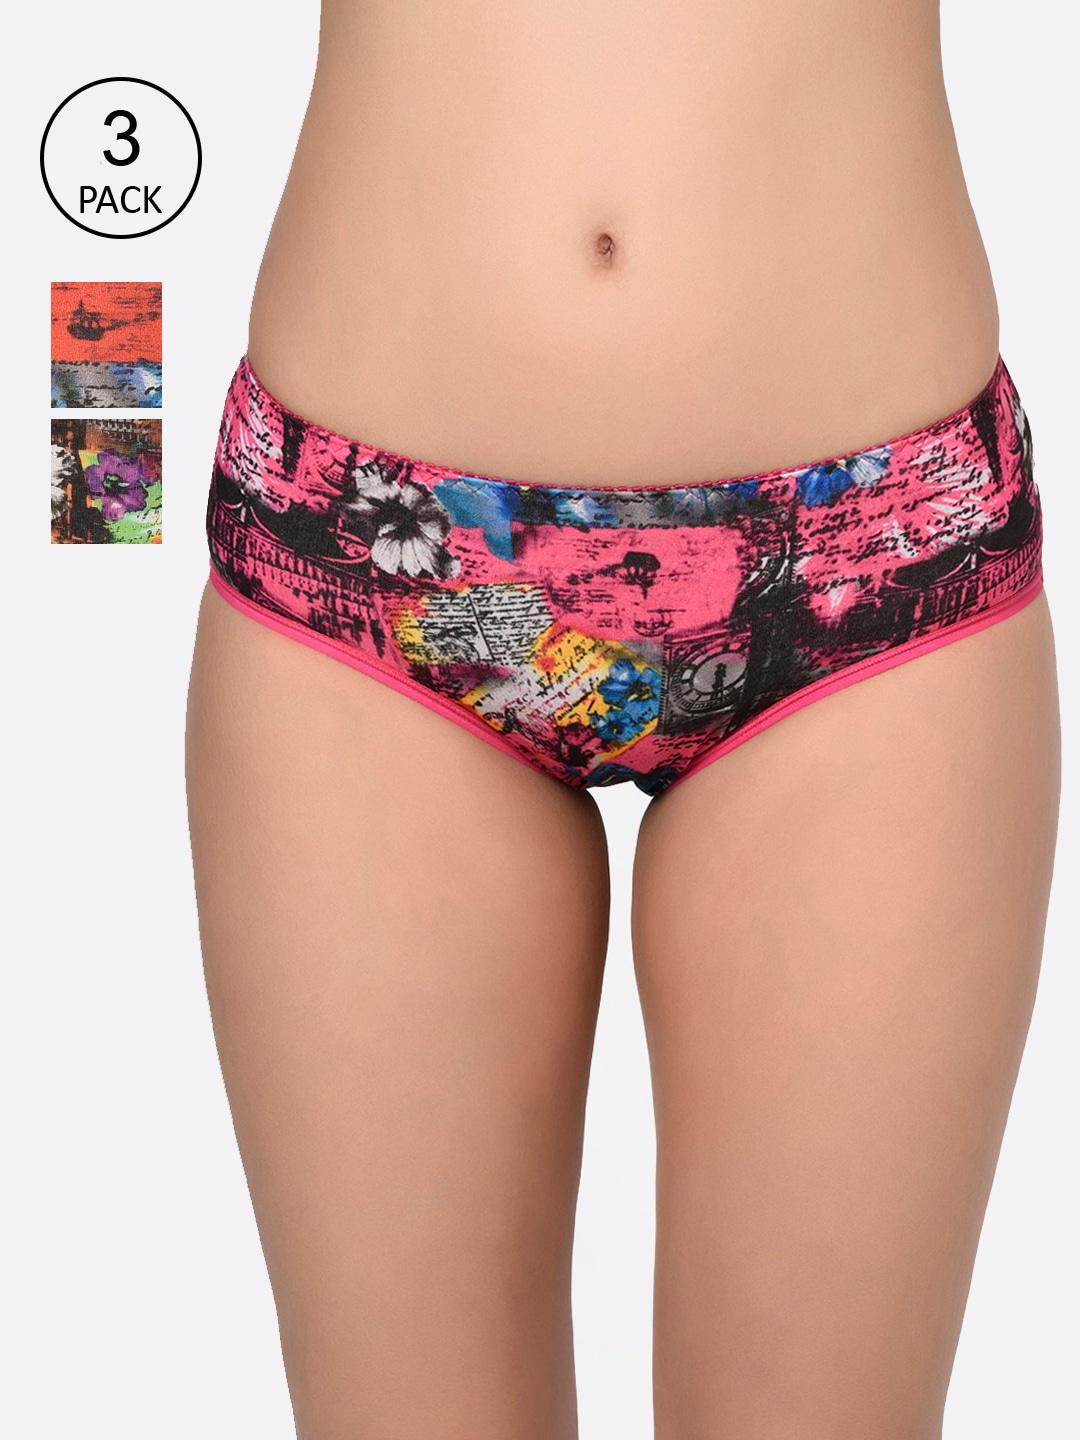 bodycare women pack of 3 assorted printed hipster briefs 9006-3pcs